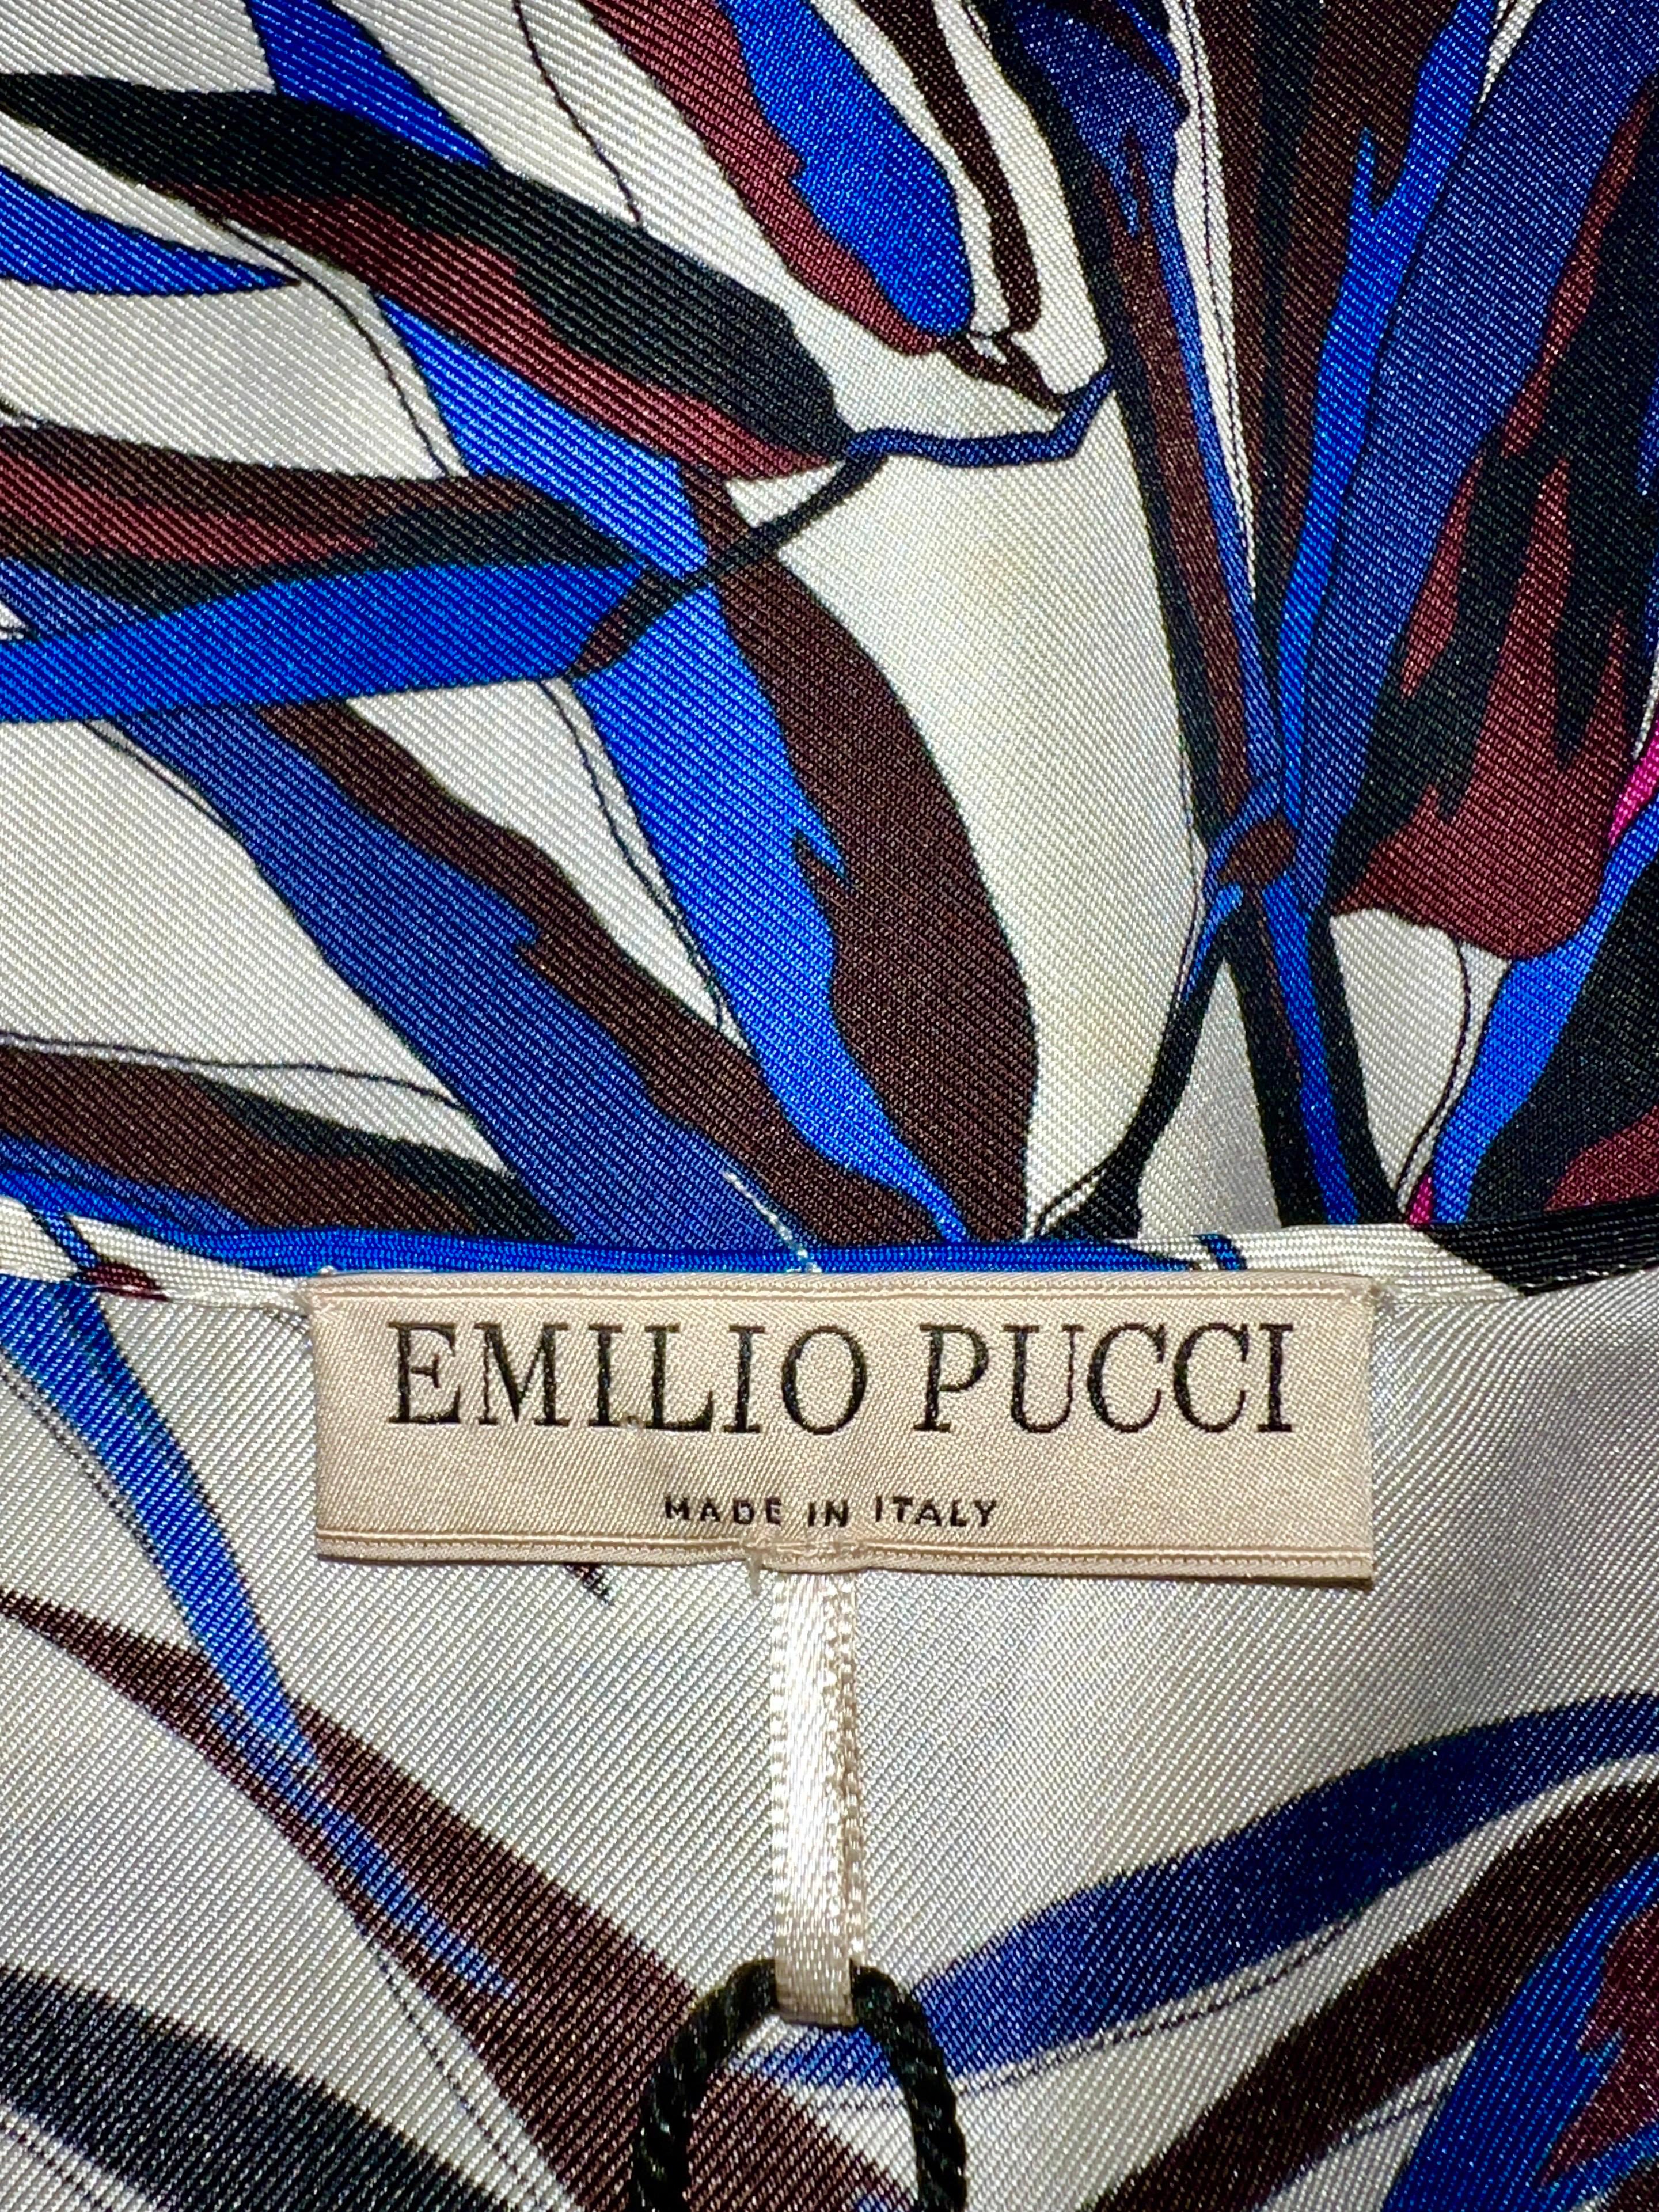 Emilio Pucci Tropical Bamboo Signature Print Silk Twill Top Blouse Bowtie 38 For Sale 2